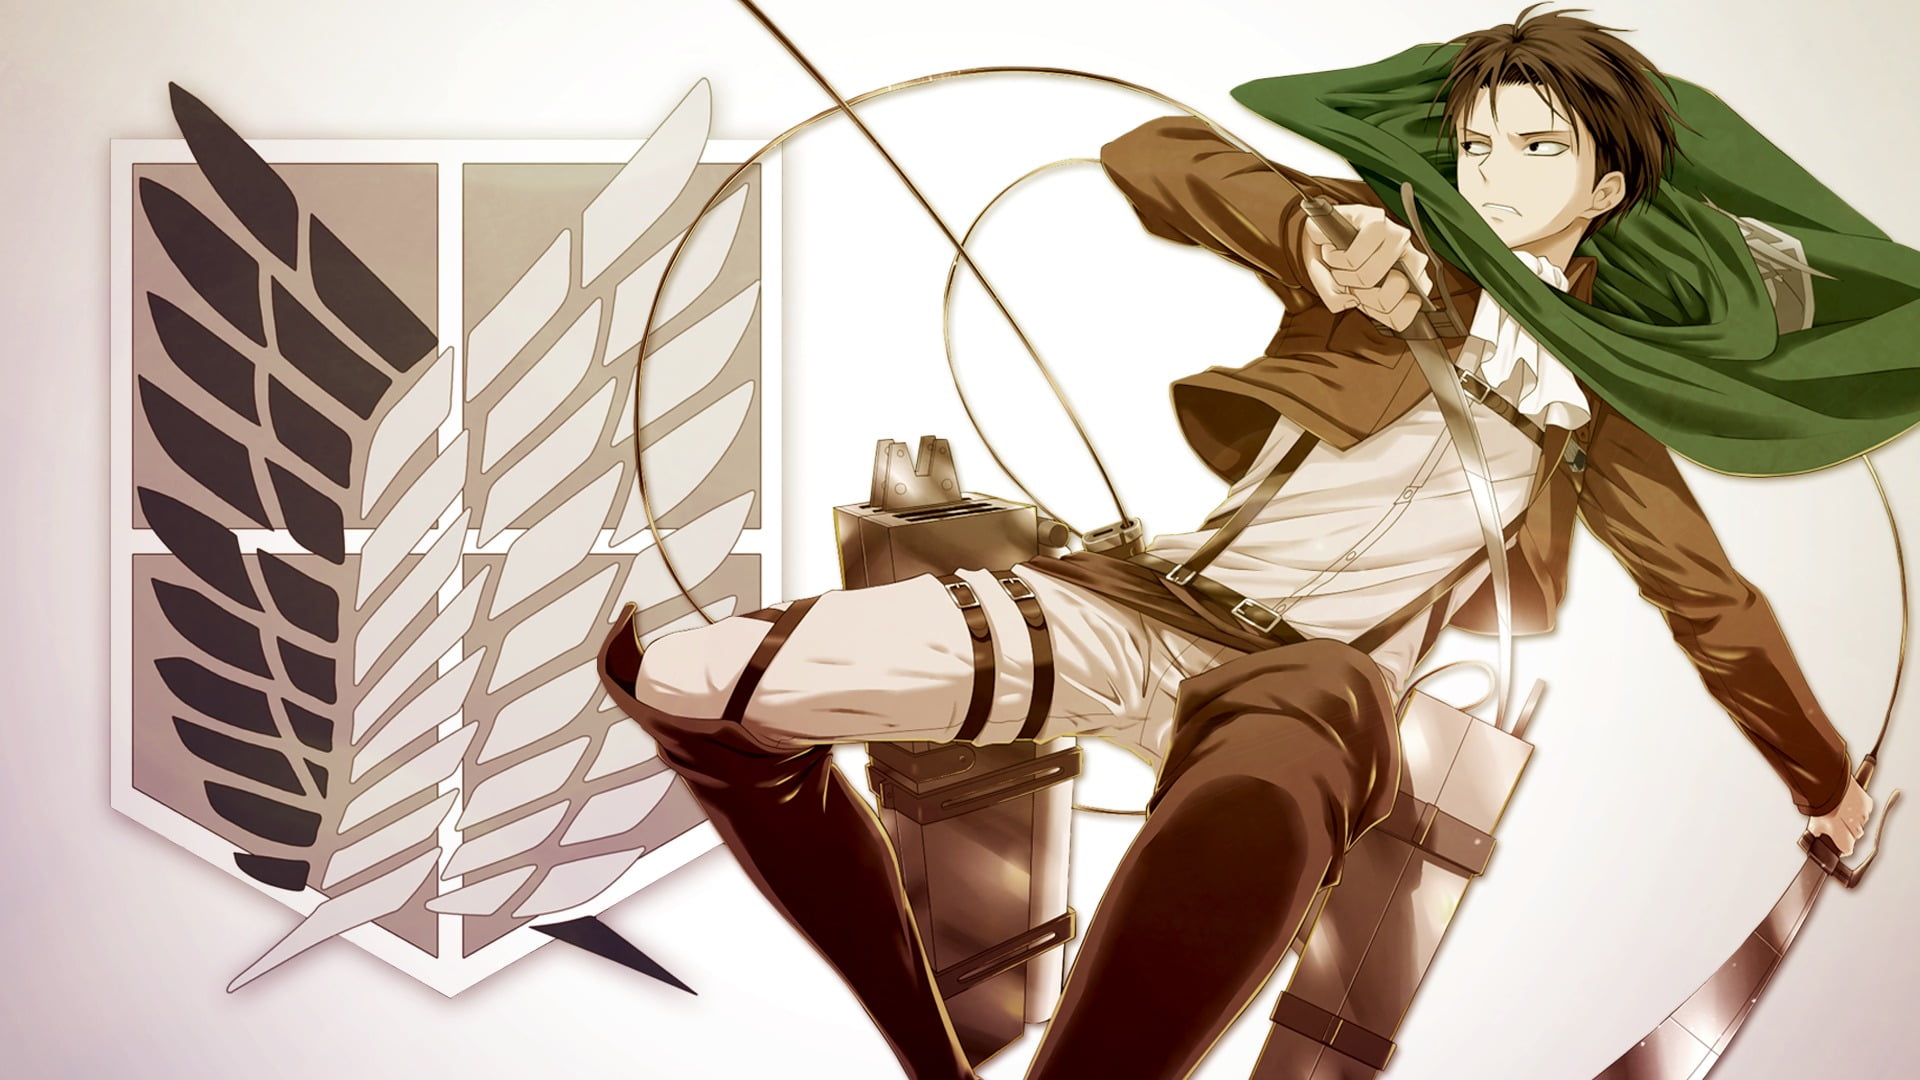 Attack on Titan character wallpaper